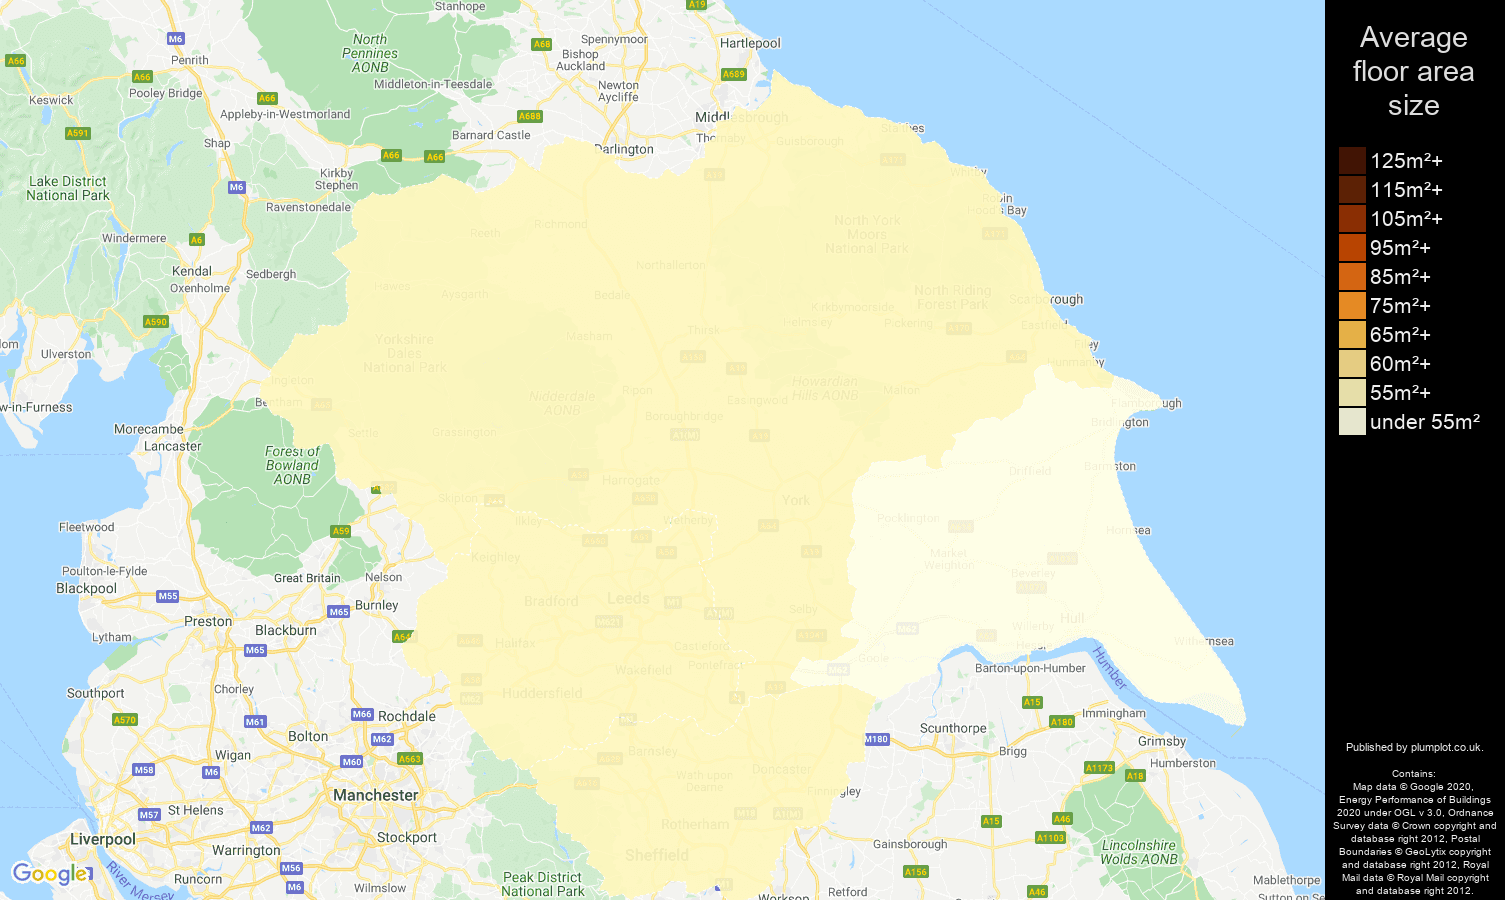 Yorkshire map of average floor area size of flats